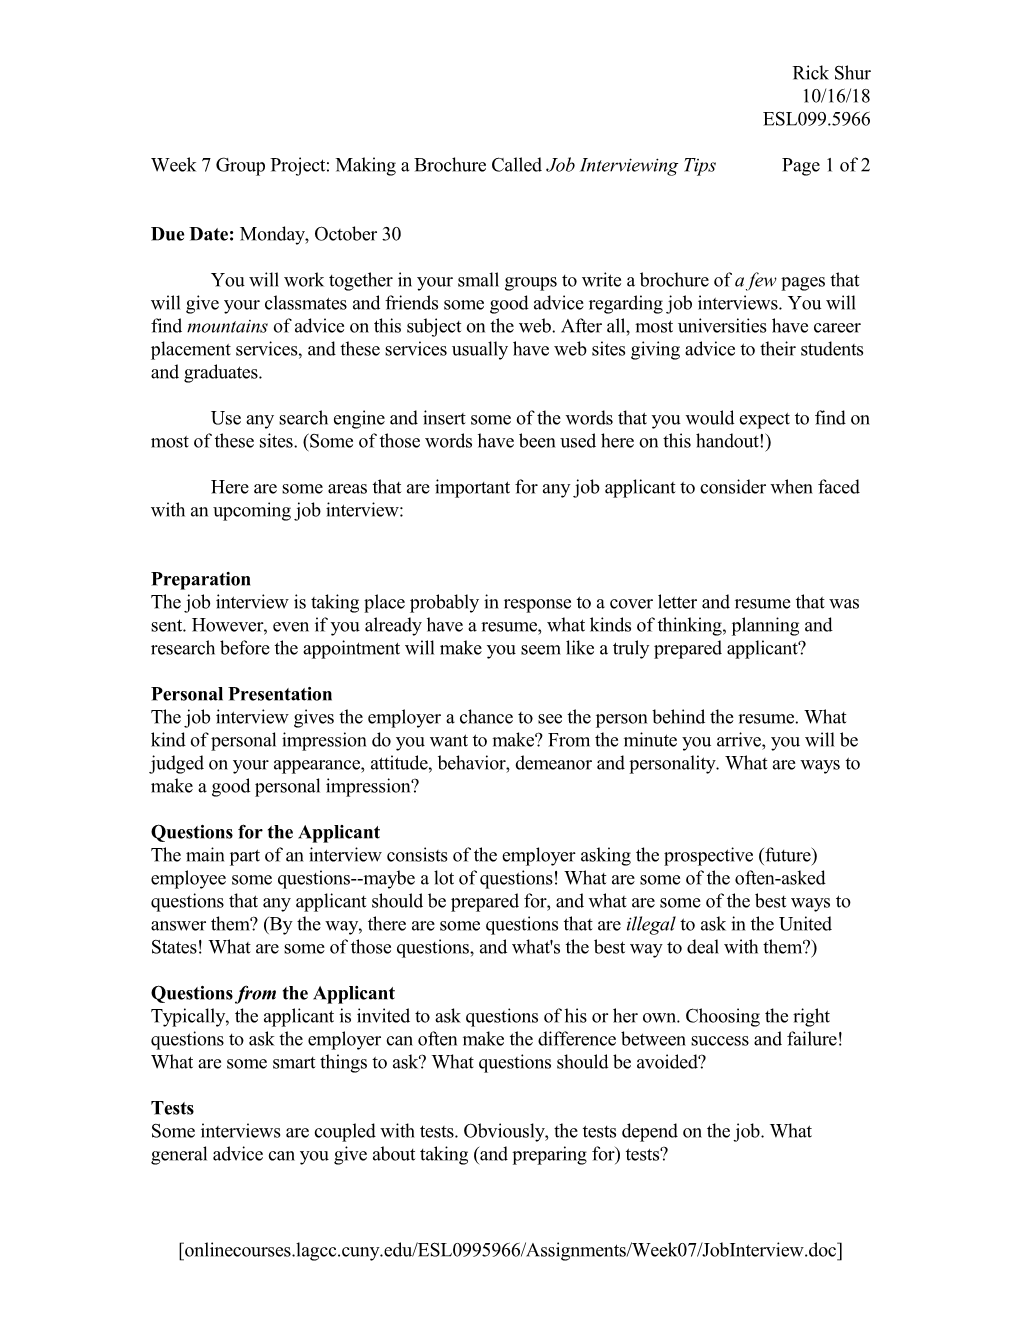 Week 7 Group Project: Making a Brochure Called Job Interviewing Tipspage 1 of 2